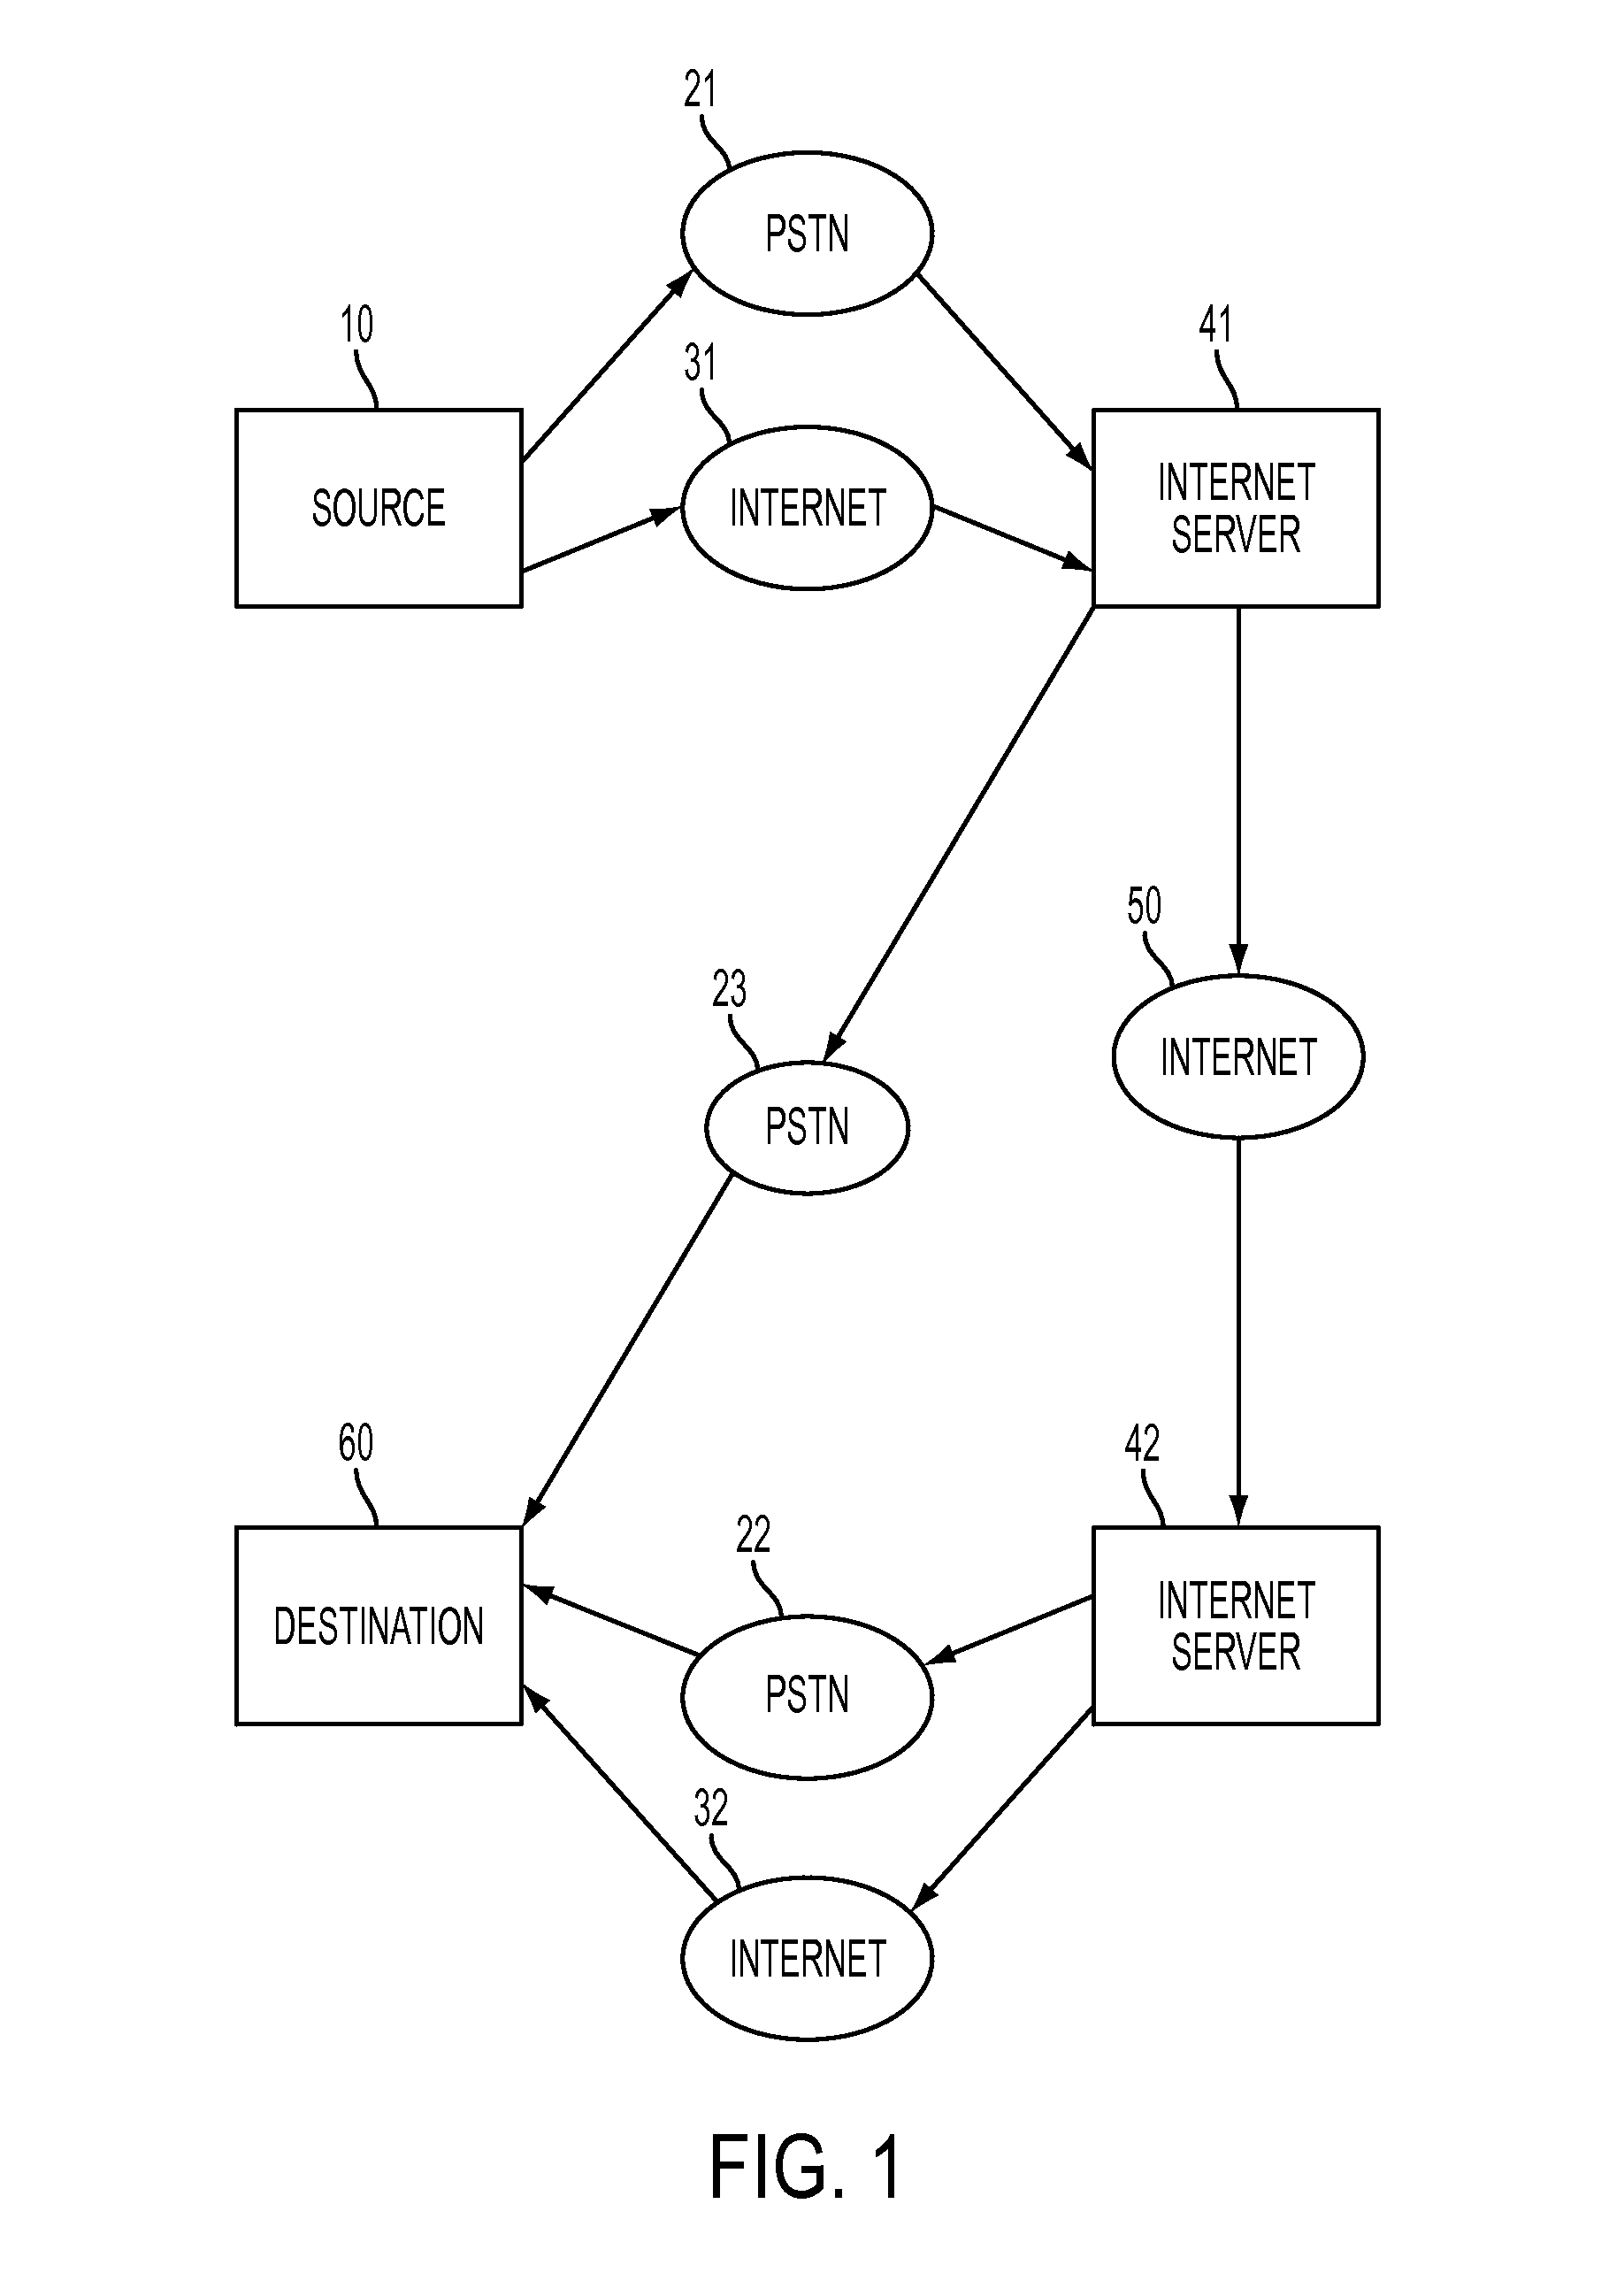 System for Interconnecting Standard Telephony Communications Equipment to Internet